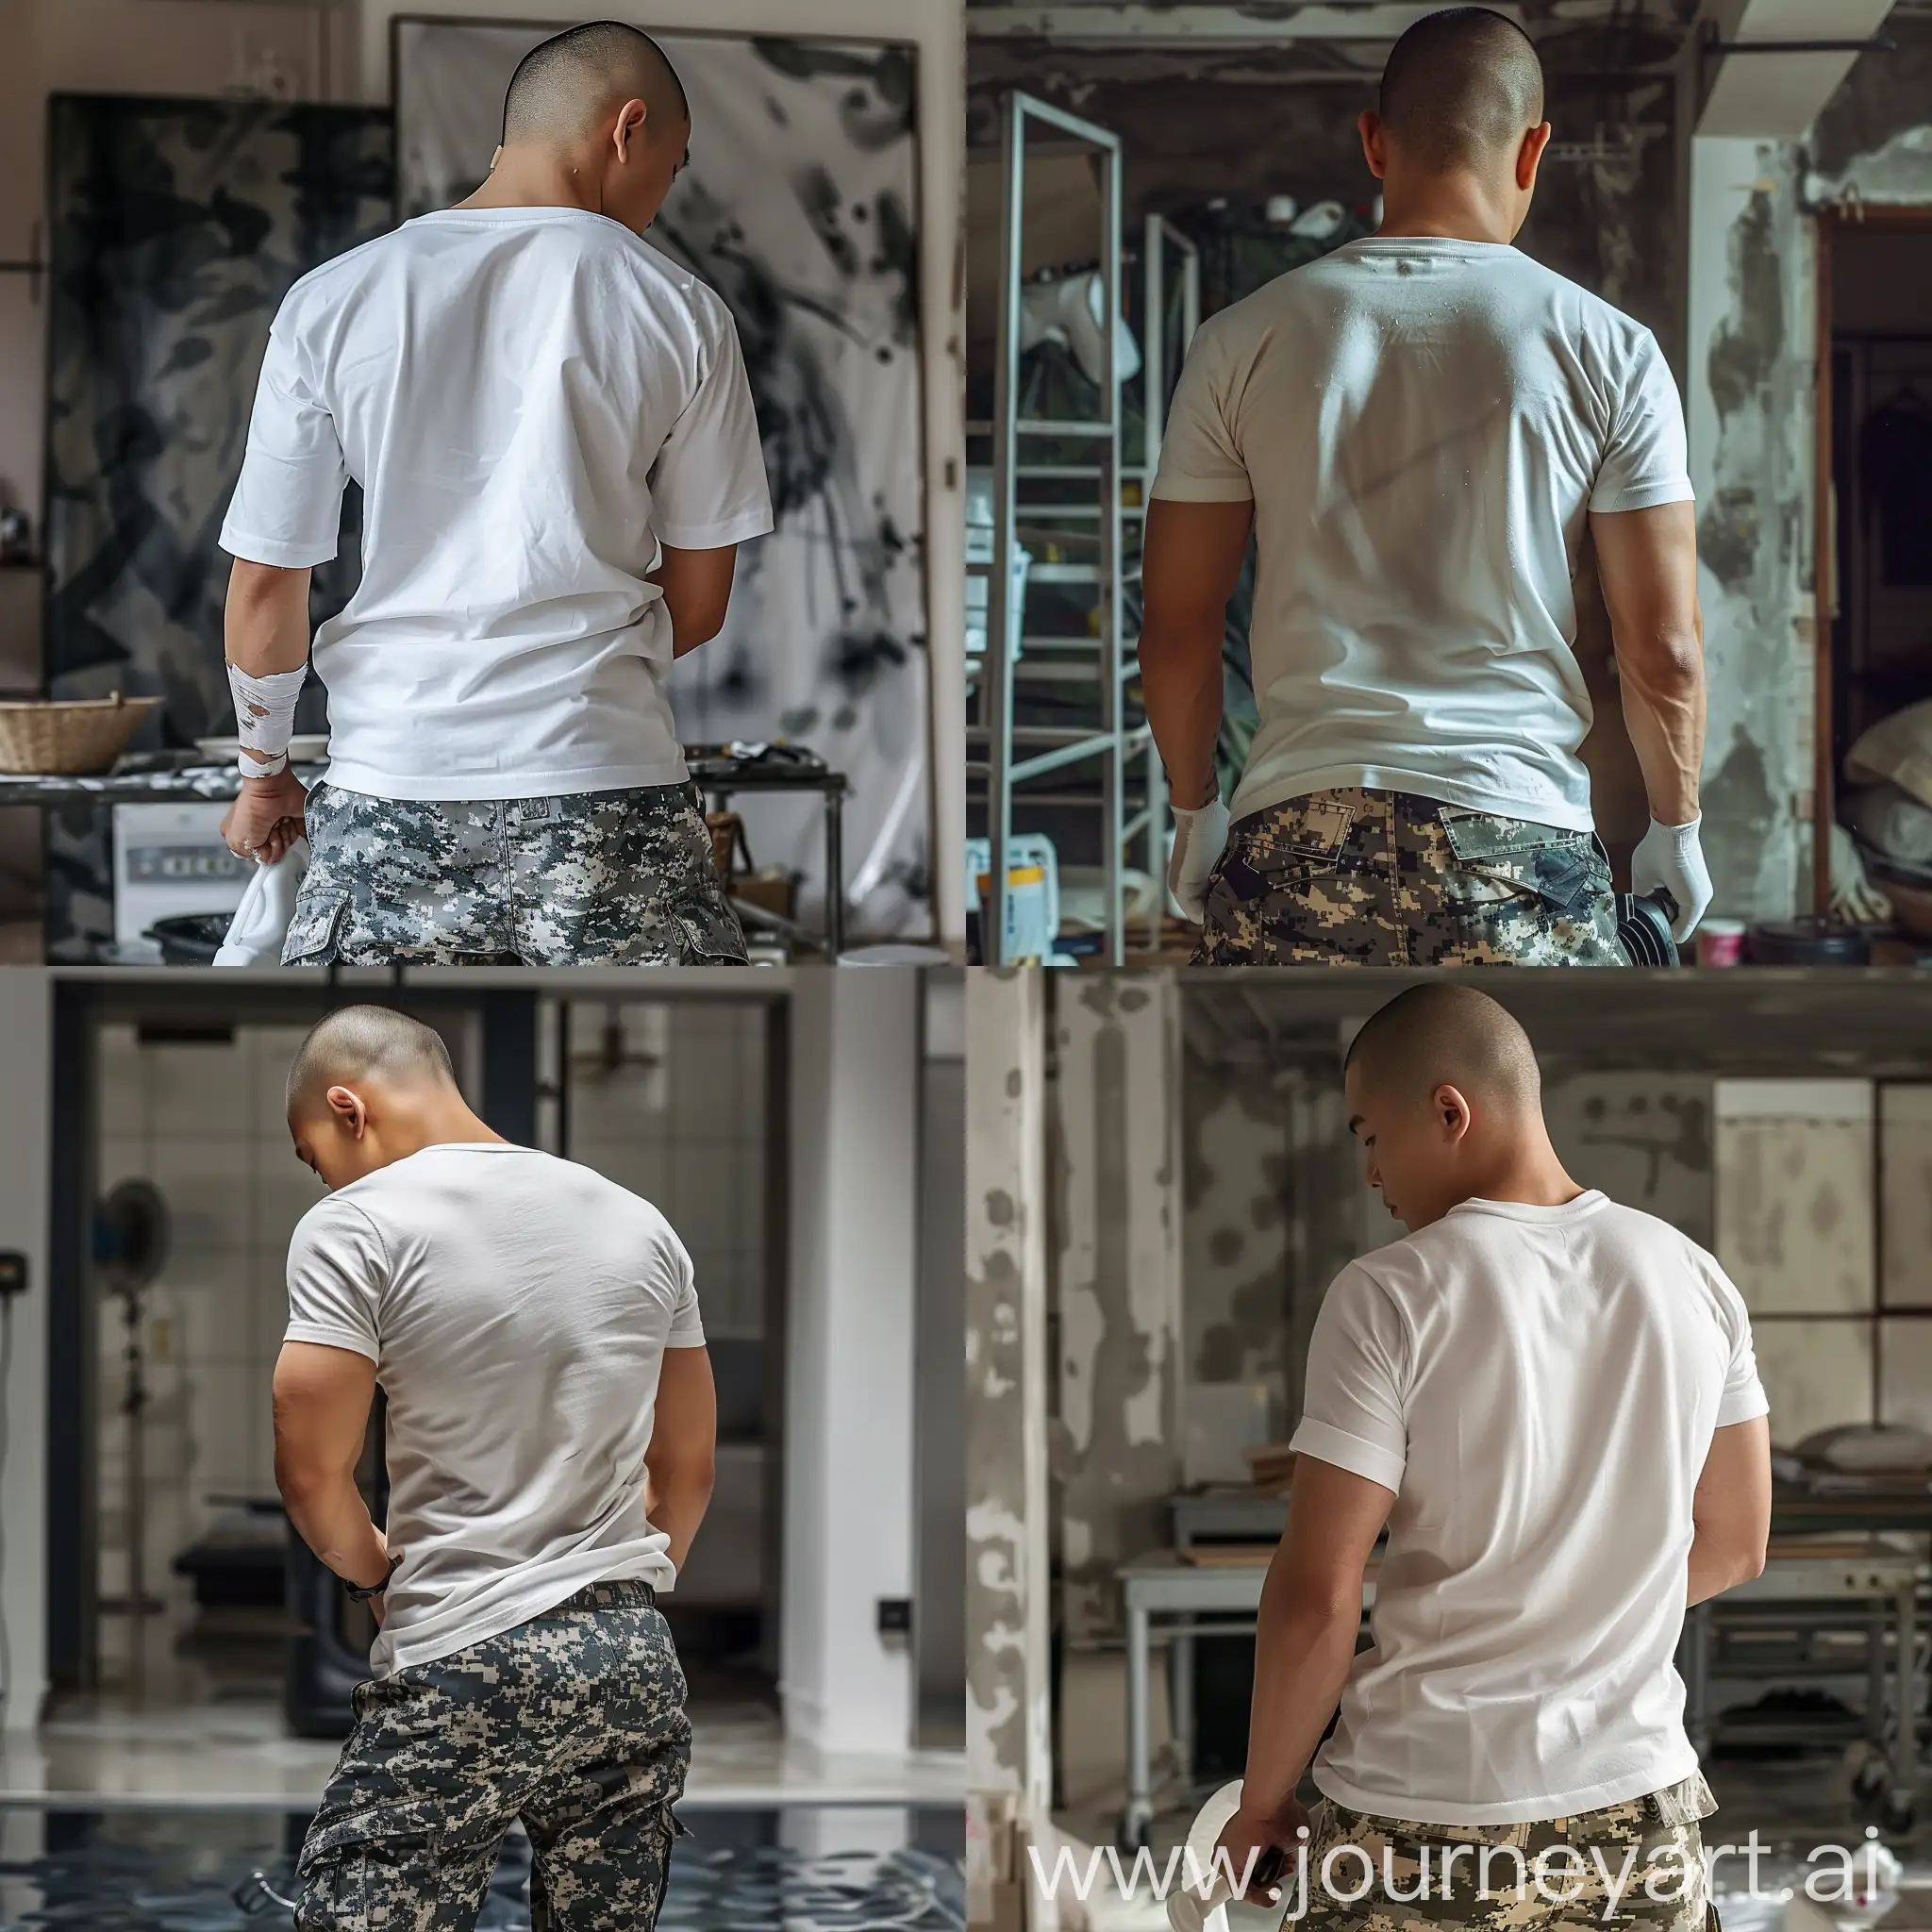 Back angle of an asian male fit soldier wearing a white T-shirt and military camouflage pants, scrubbing the floor, back view, with short bald black hair, military male bald crew haircut, An apartment background